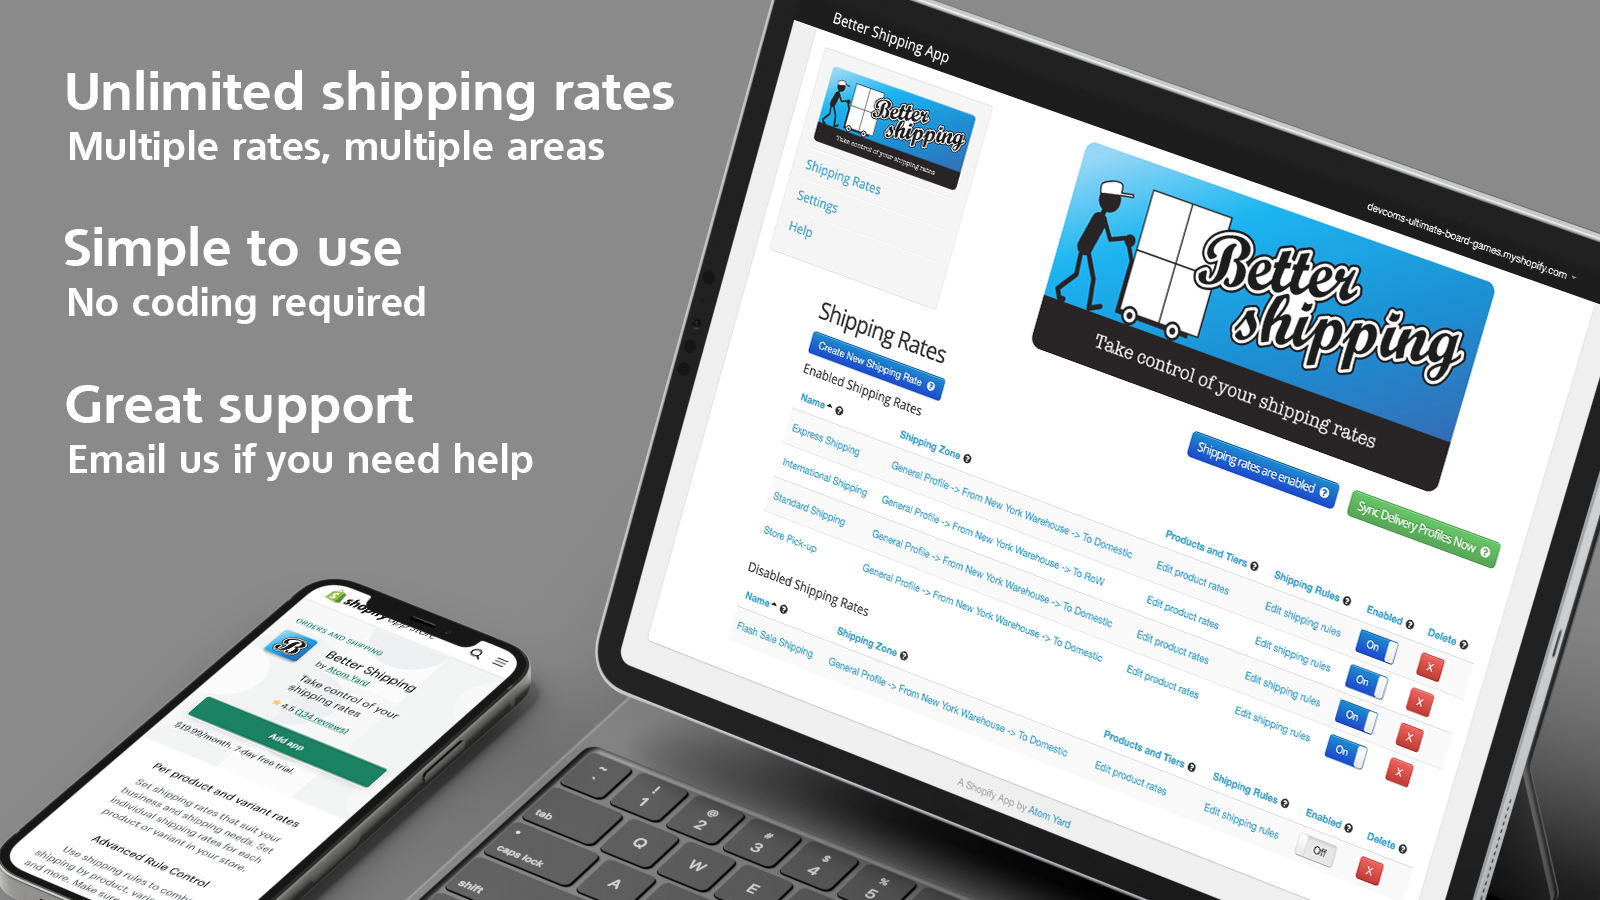 Better Shipping unlimited rates no coding great support multiple